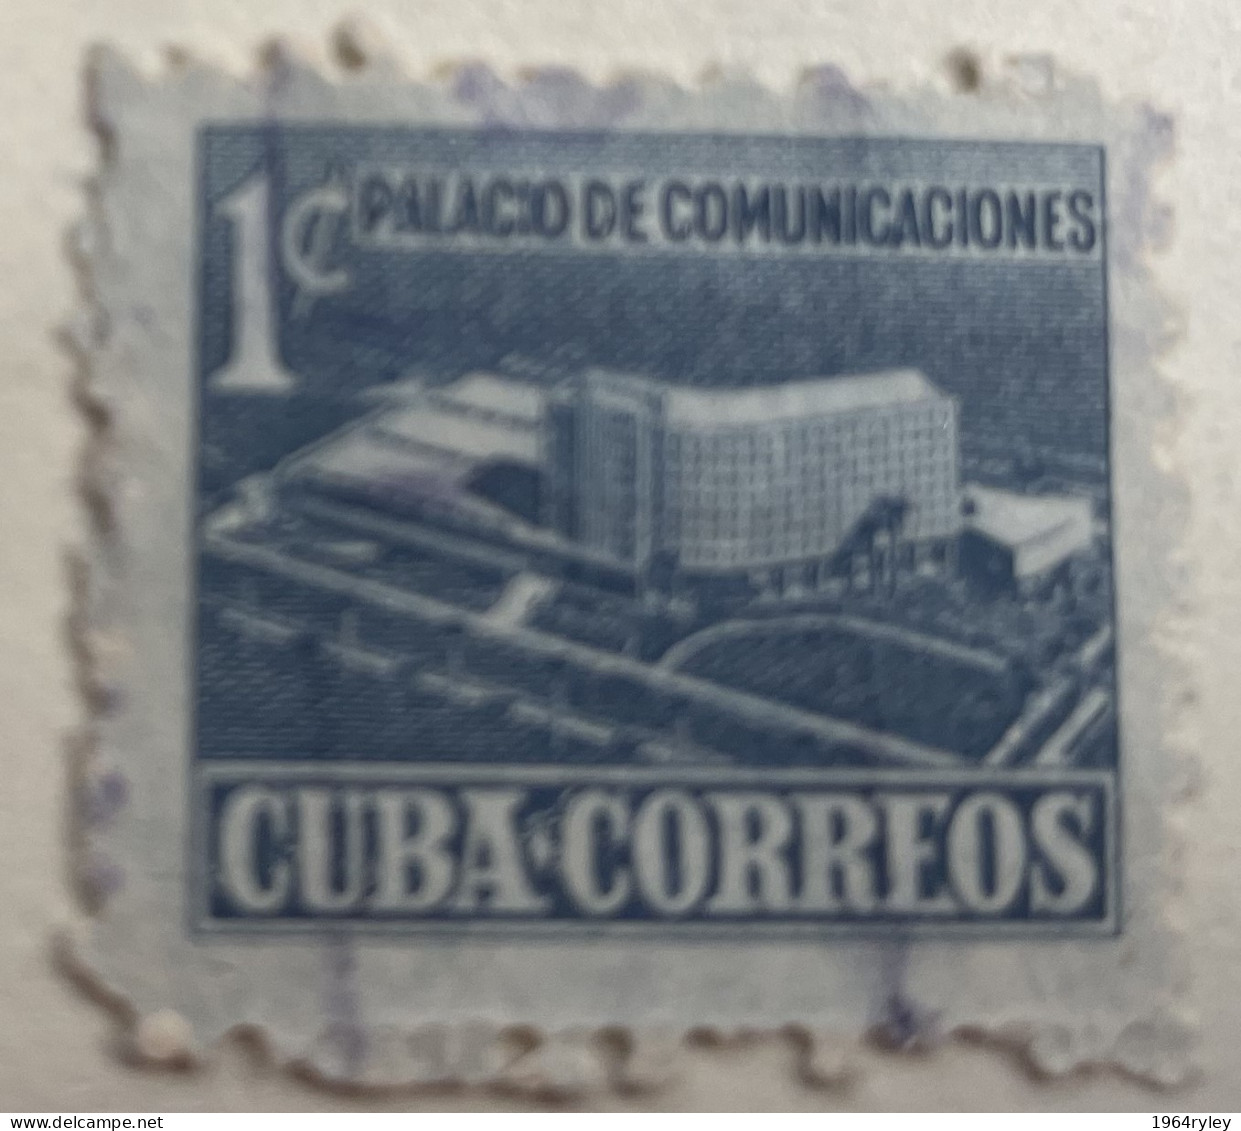 CUBA - (0) - 1952  -   # RA 16 - Used Stamps